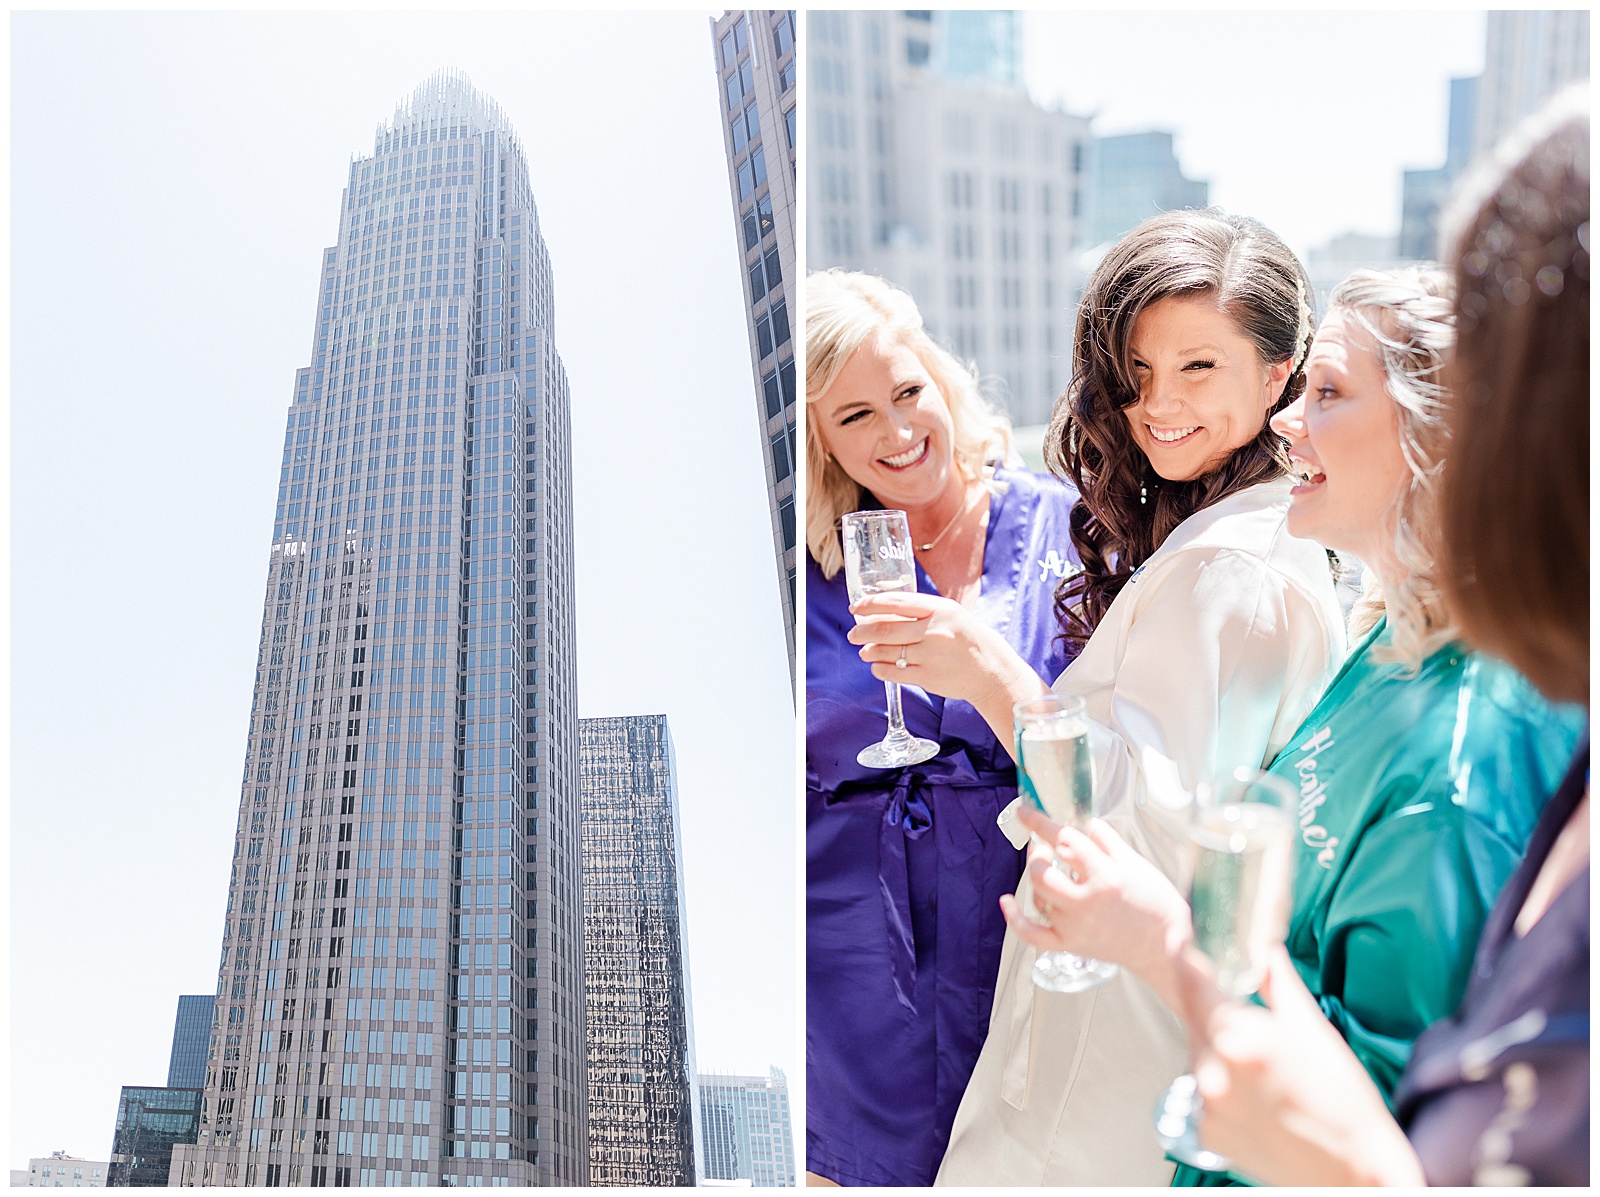 💍 bride bridesmaids have a drink group photo downtown city background venue 👰 Bride: lace wedding dress with rhinestone belt rhinestone barrette in hair down with pearls 💍 Bright Colorful Summer City Wedding in Charlotte, NC with Taryn and Ryan | Kevyn Dixon Photography